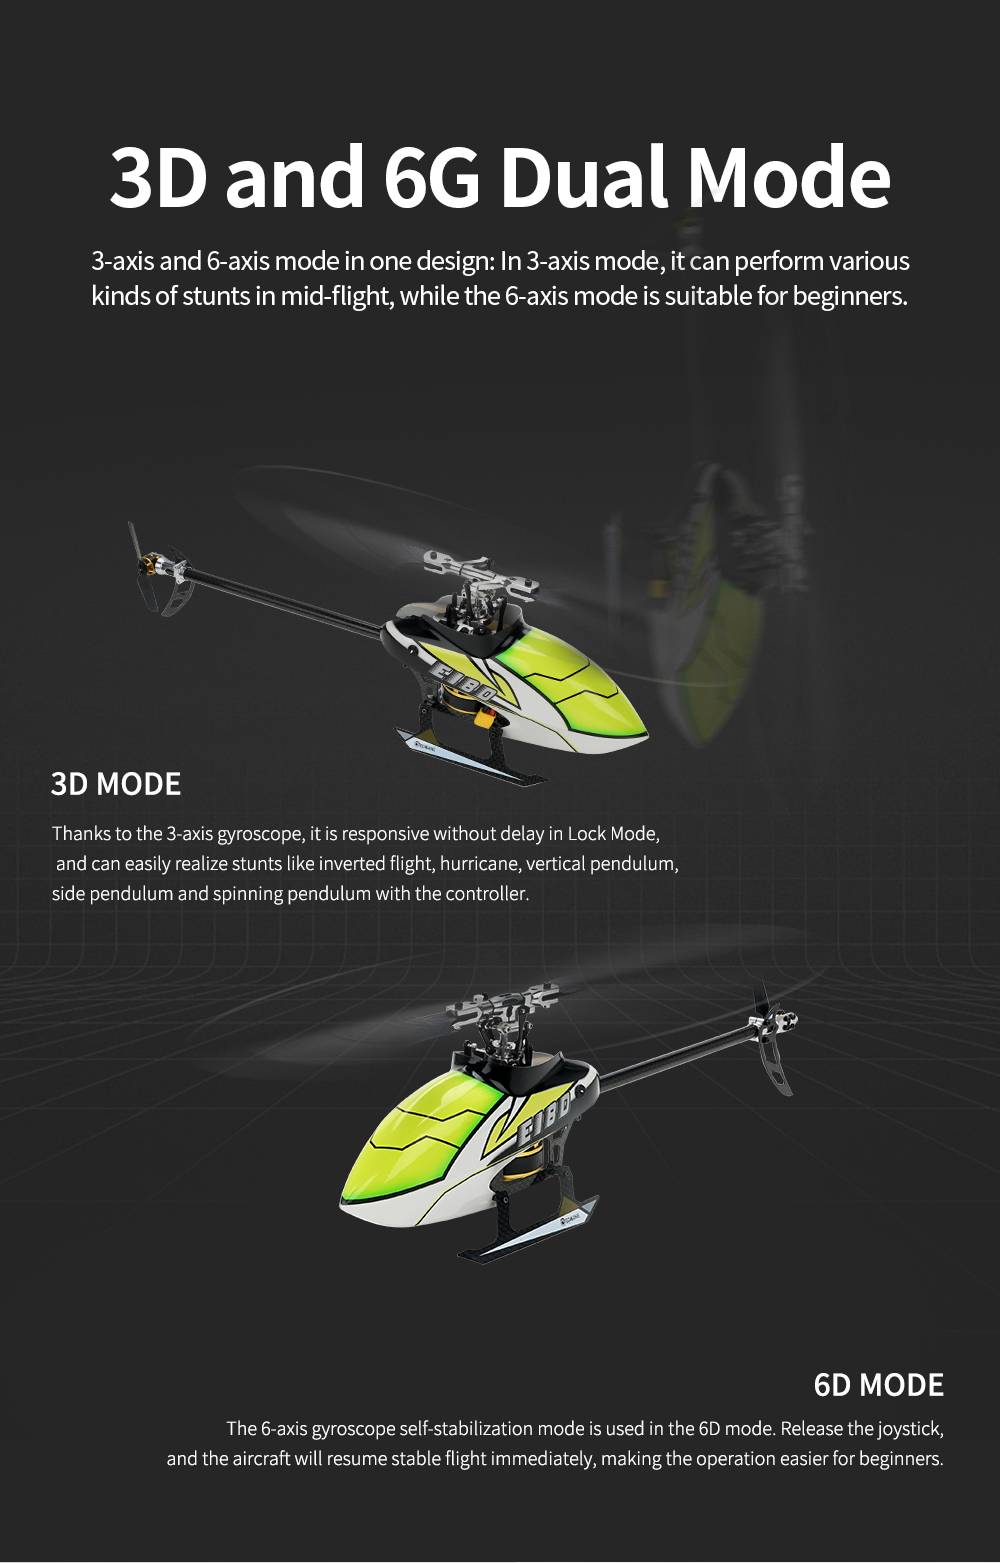 Eachine-E180-6CH-3D6G-System-Dual-Brushless-Direct-Drive-Motor-Flybarless-RC-Helicopter-BNF-Compatib-1810193-7